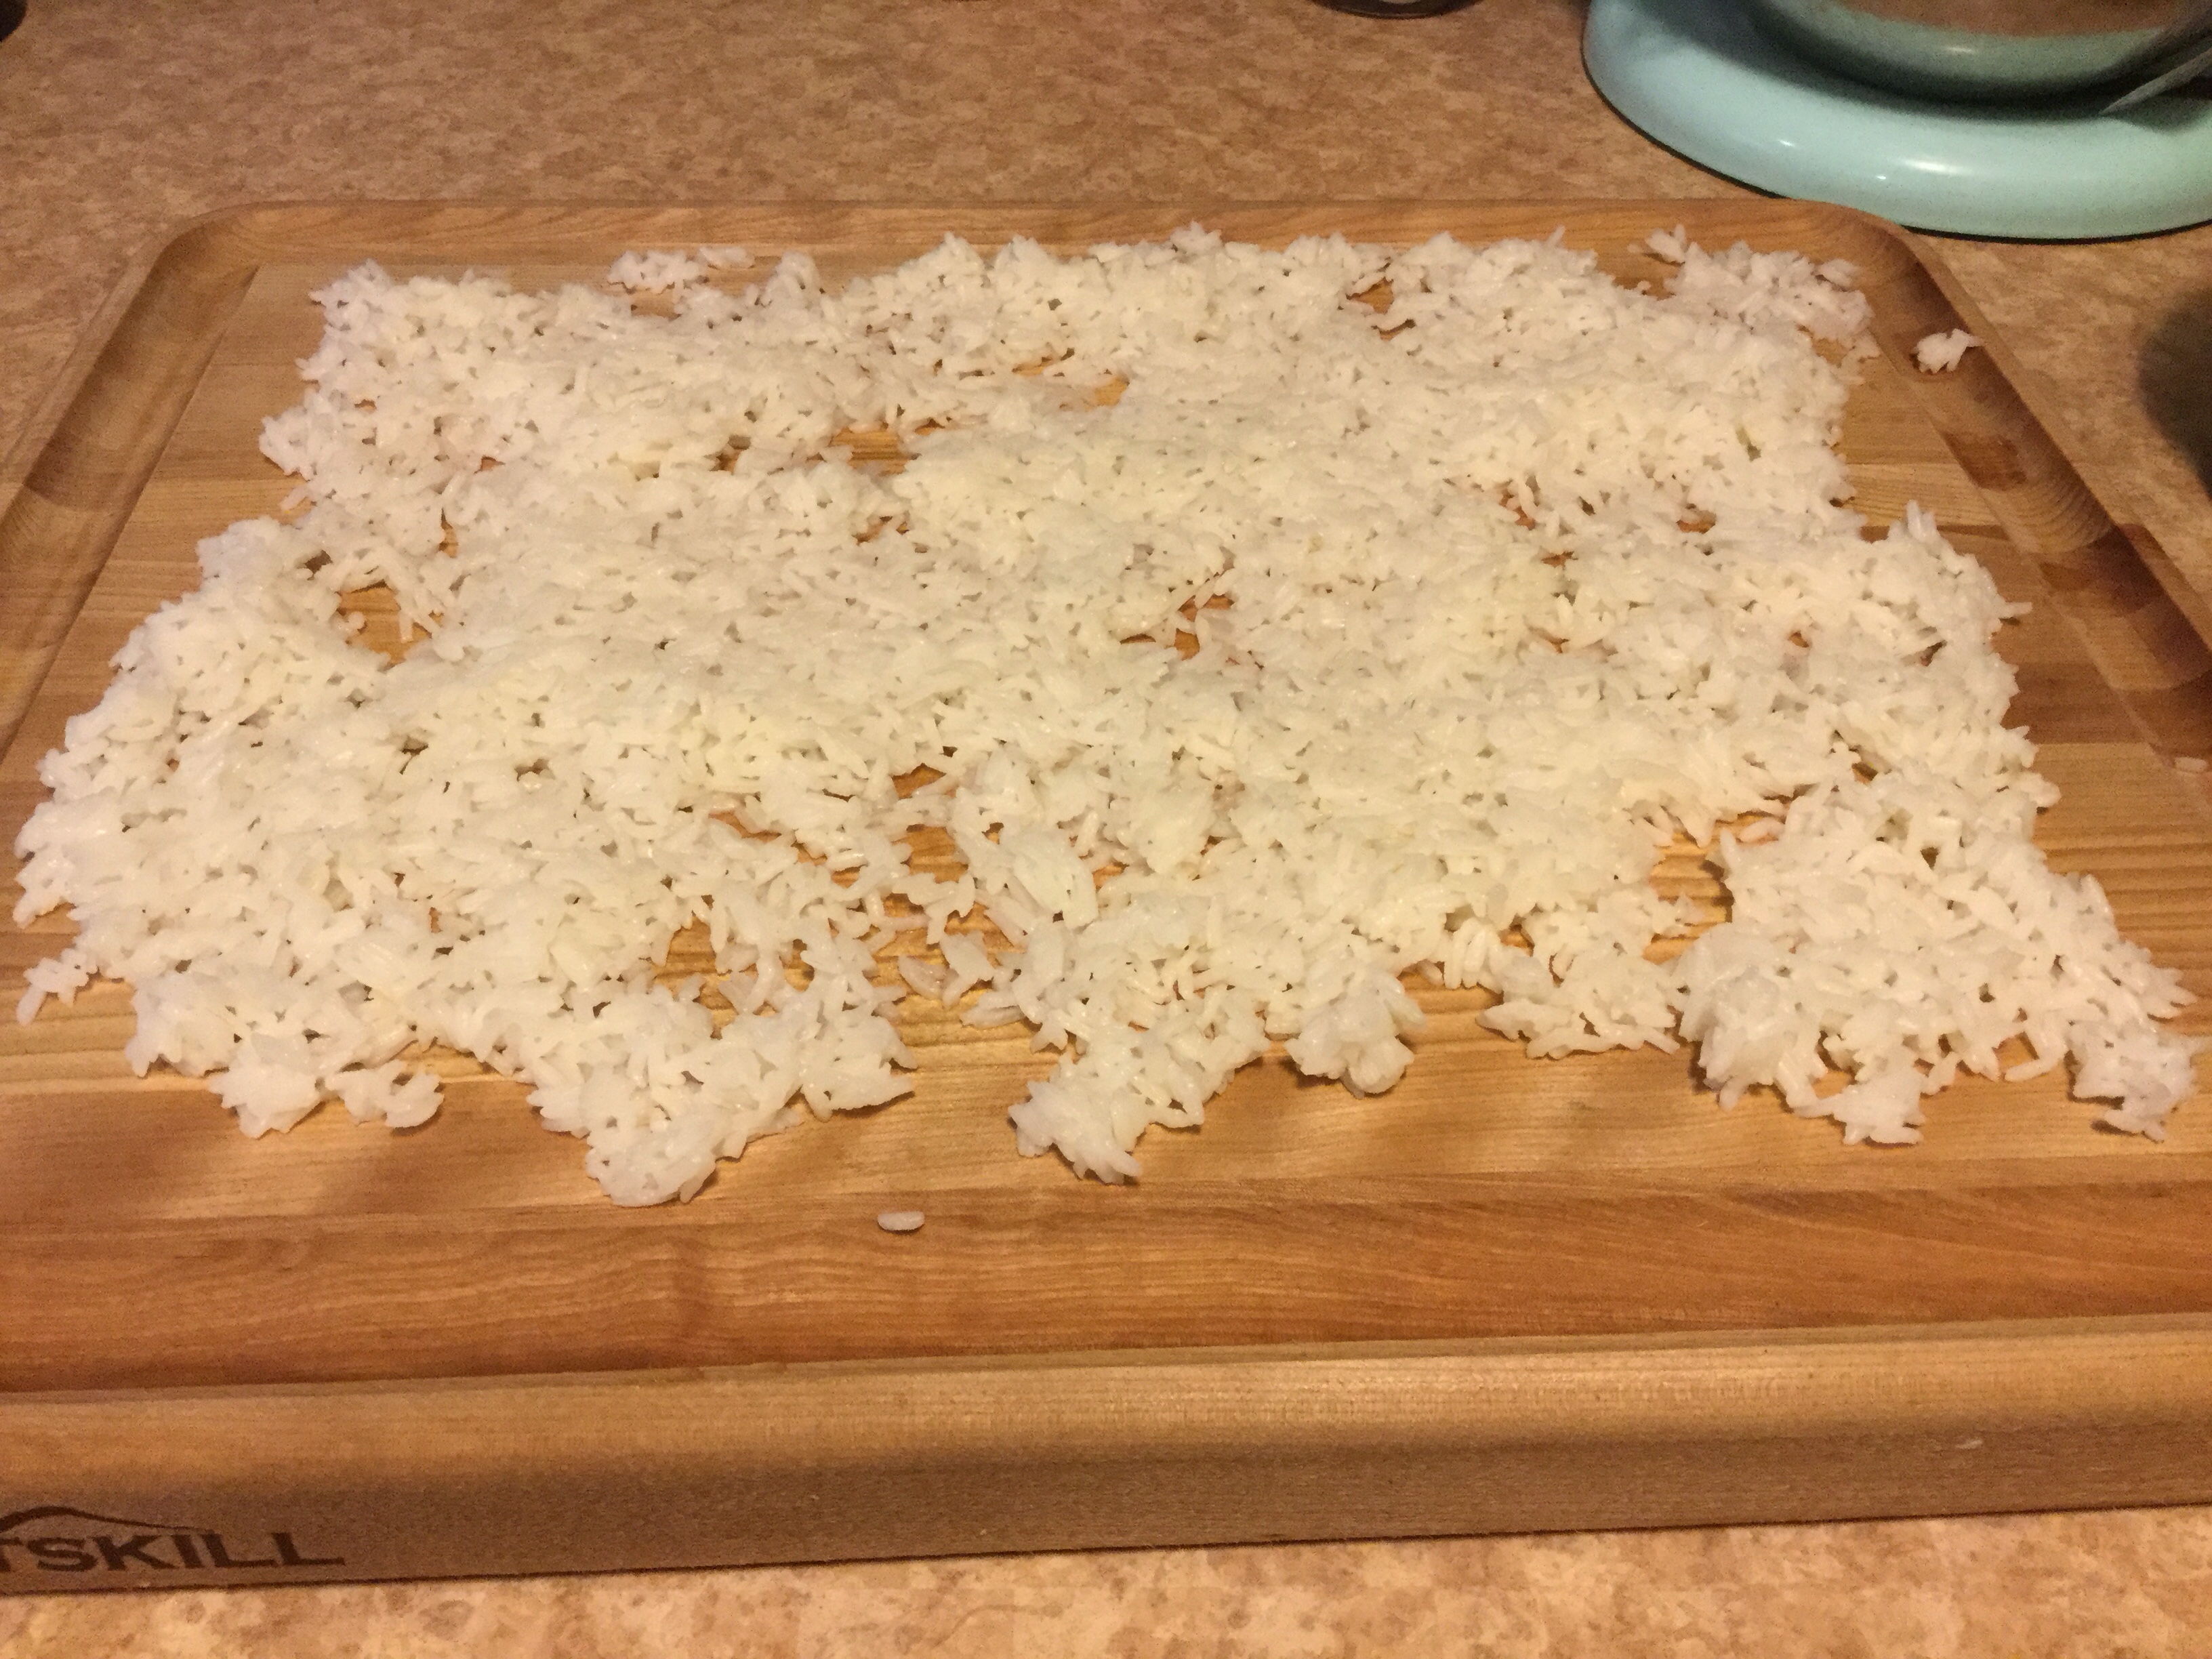 Trying out the Delamu Sushi Making Kit – Ms. Mimsy Reviews